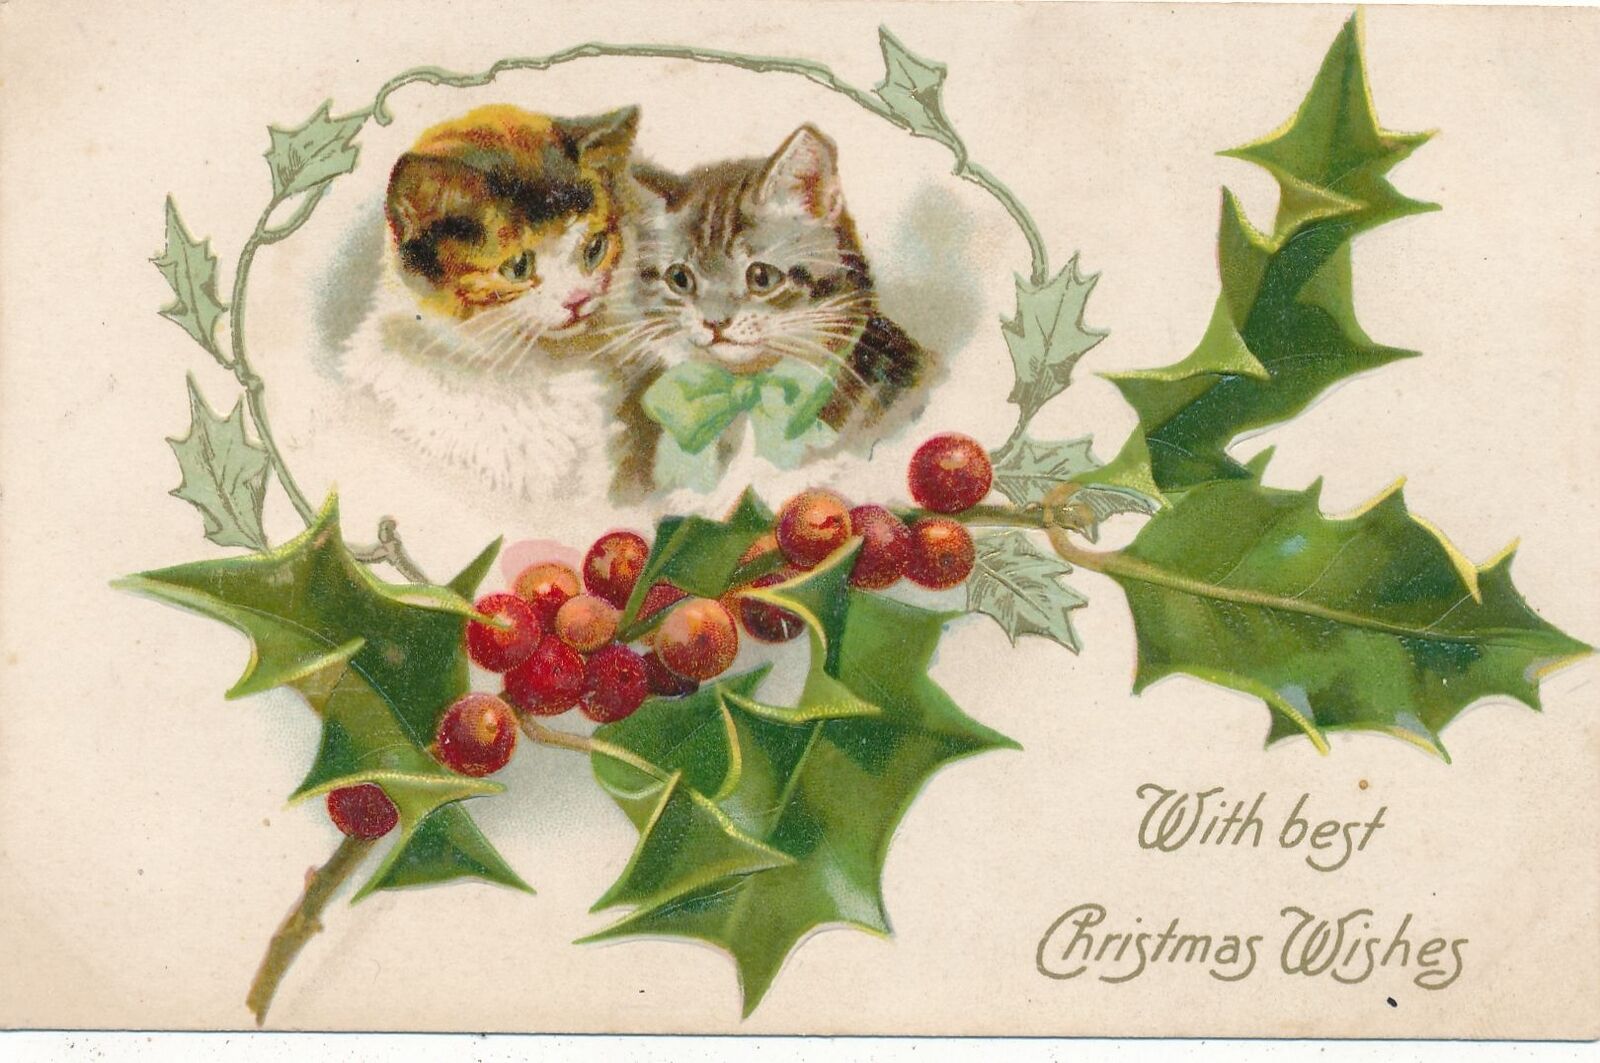 CHRISTMAS - Two Cats With Best Christmas Wishes Postcard